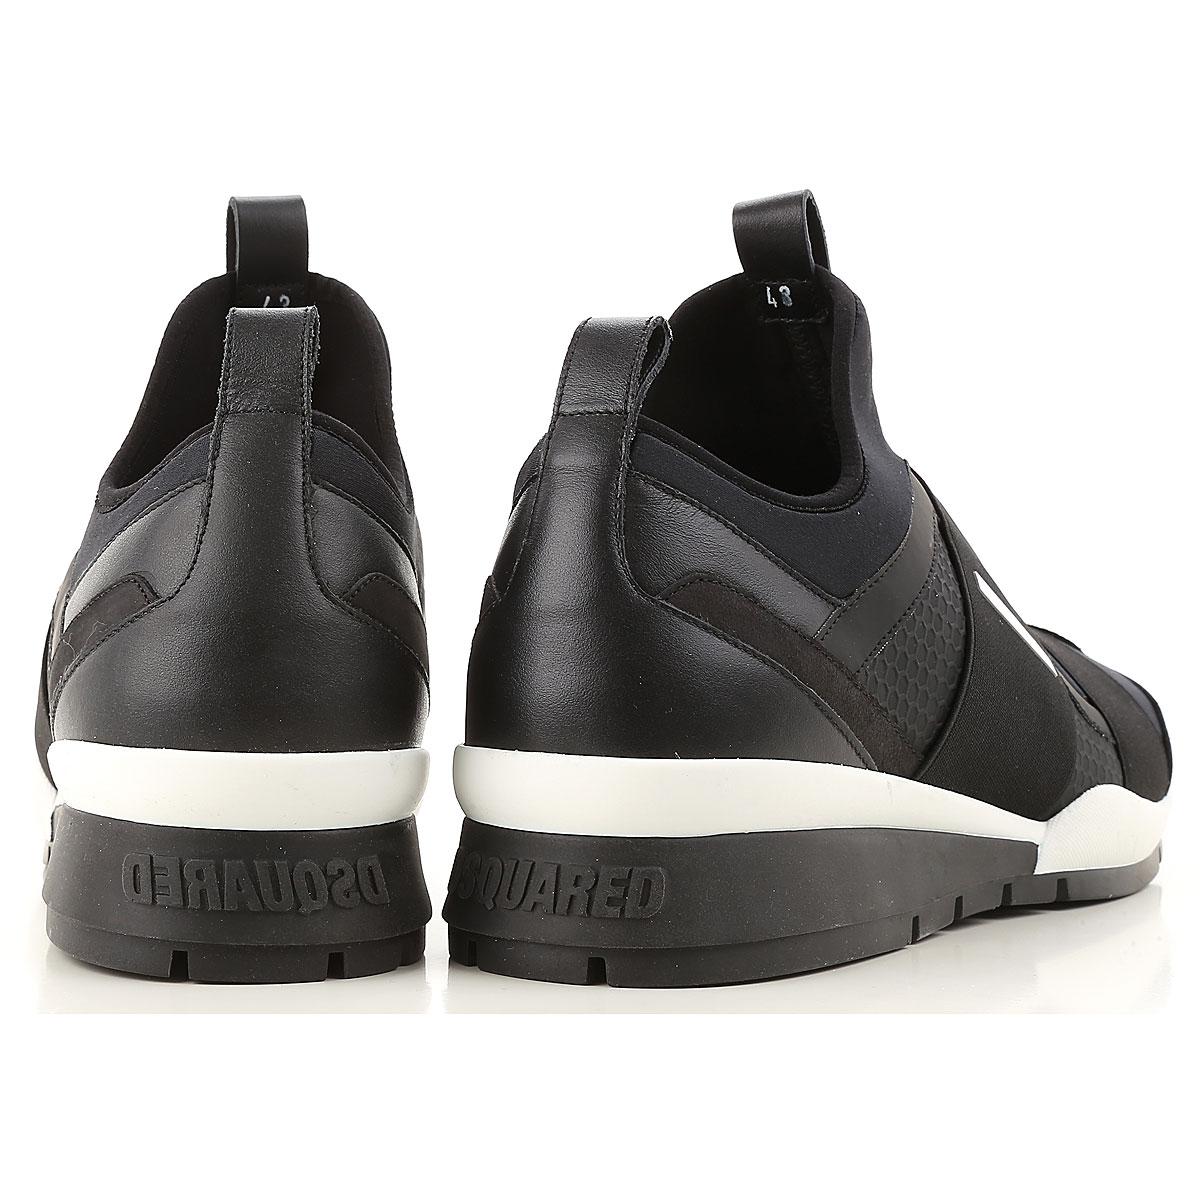 DSquared² Leather Sneakers For Men On Sale in Black for Men - Lyst